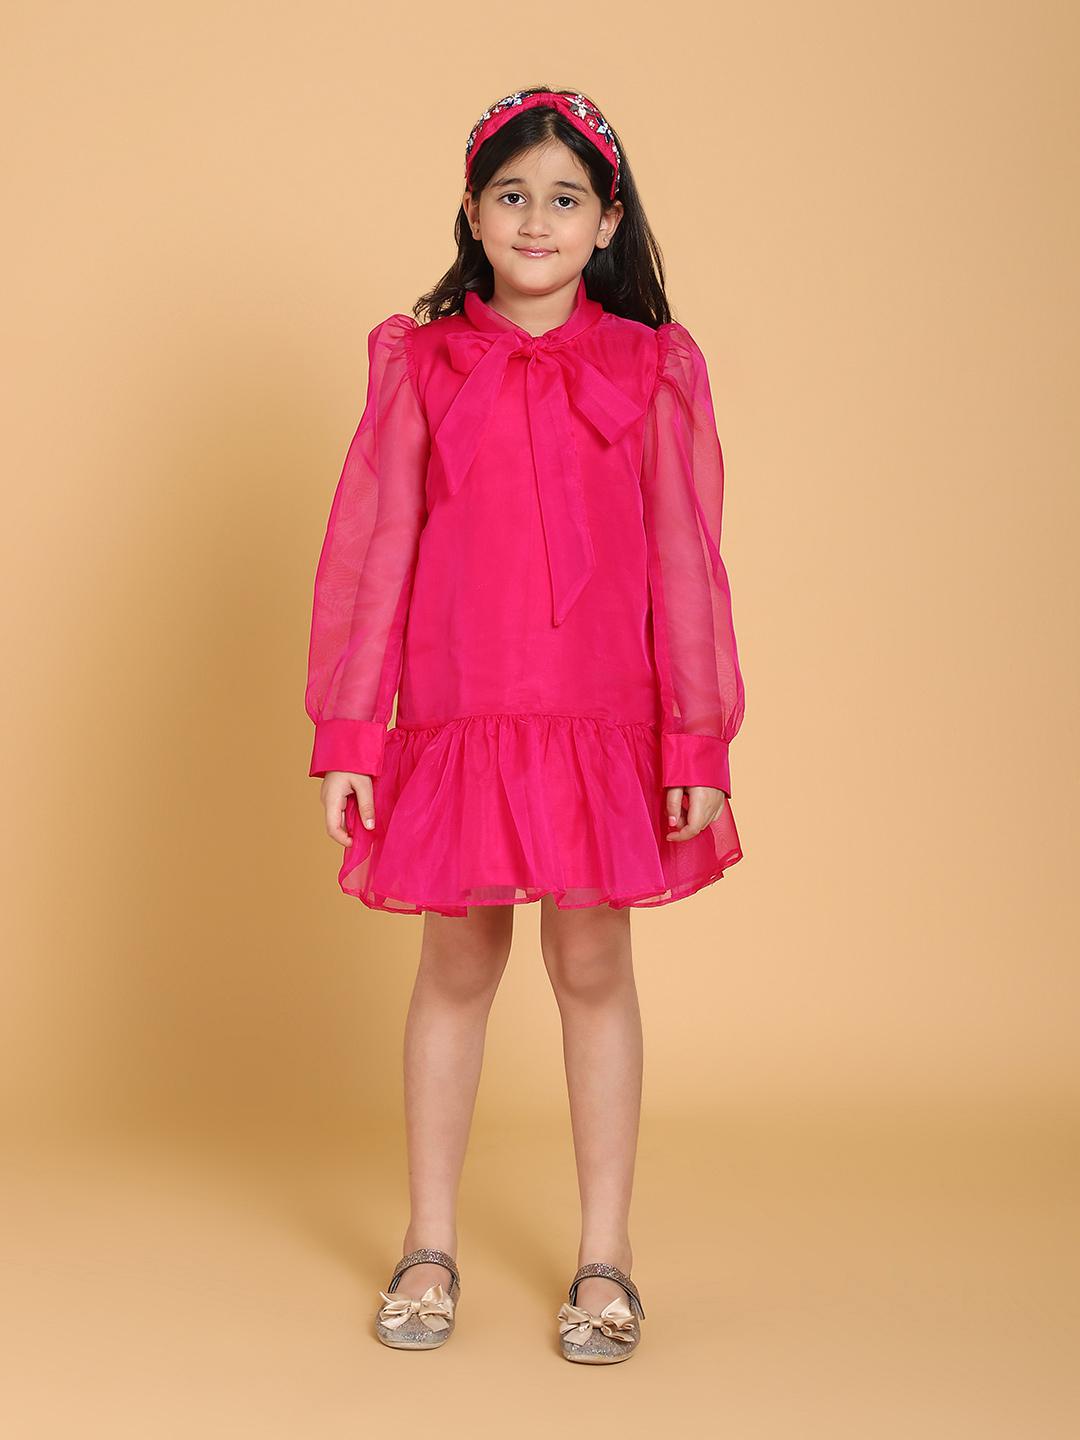 pink-organza-dress-with-bow-tie-10510097PK, Kids Clothing, Organza Girl Dress